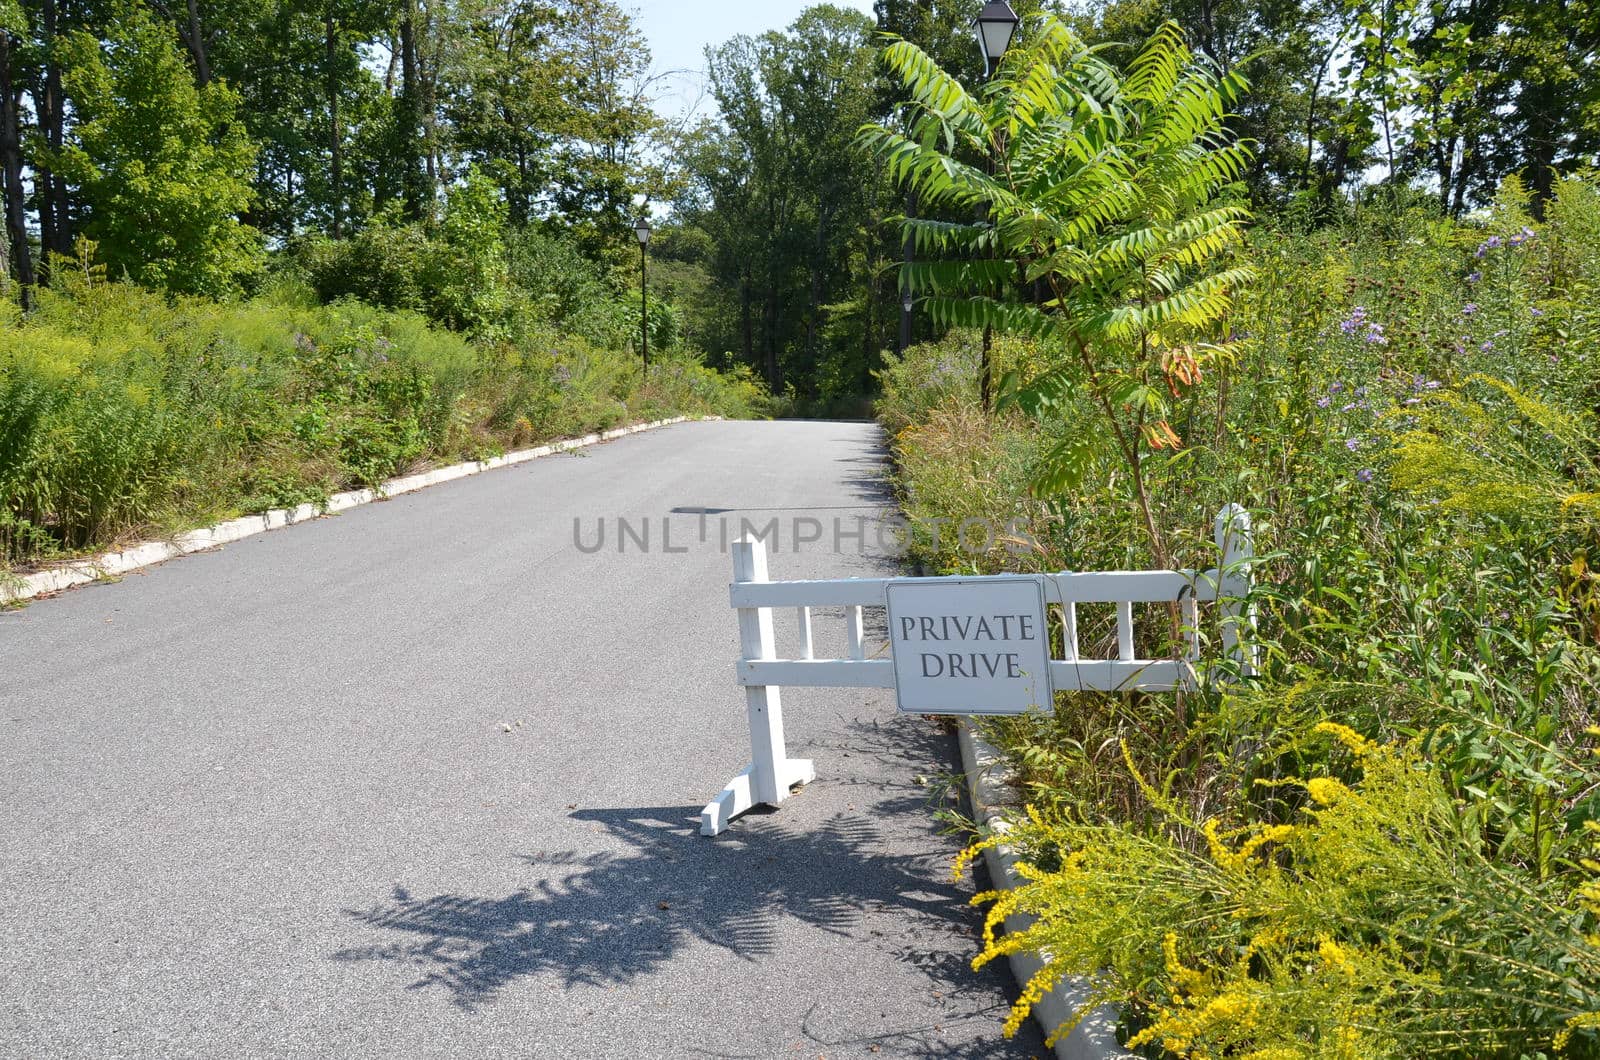 private drive sign and road with plants by stockphotofan1